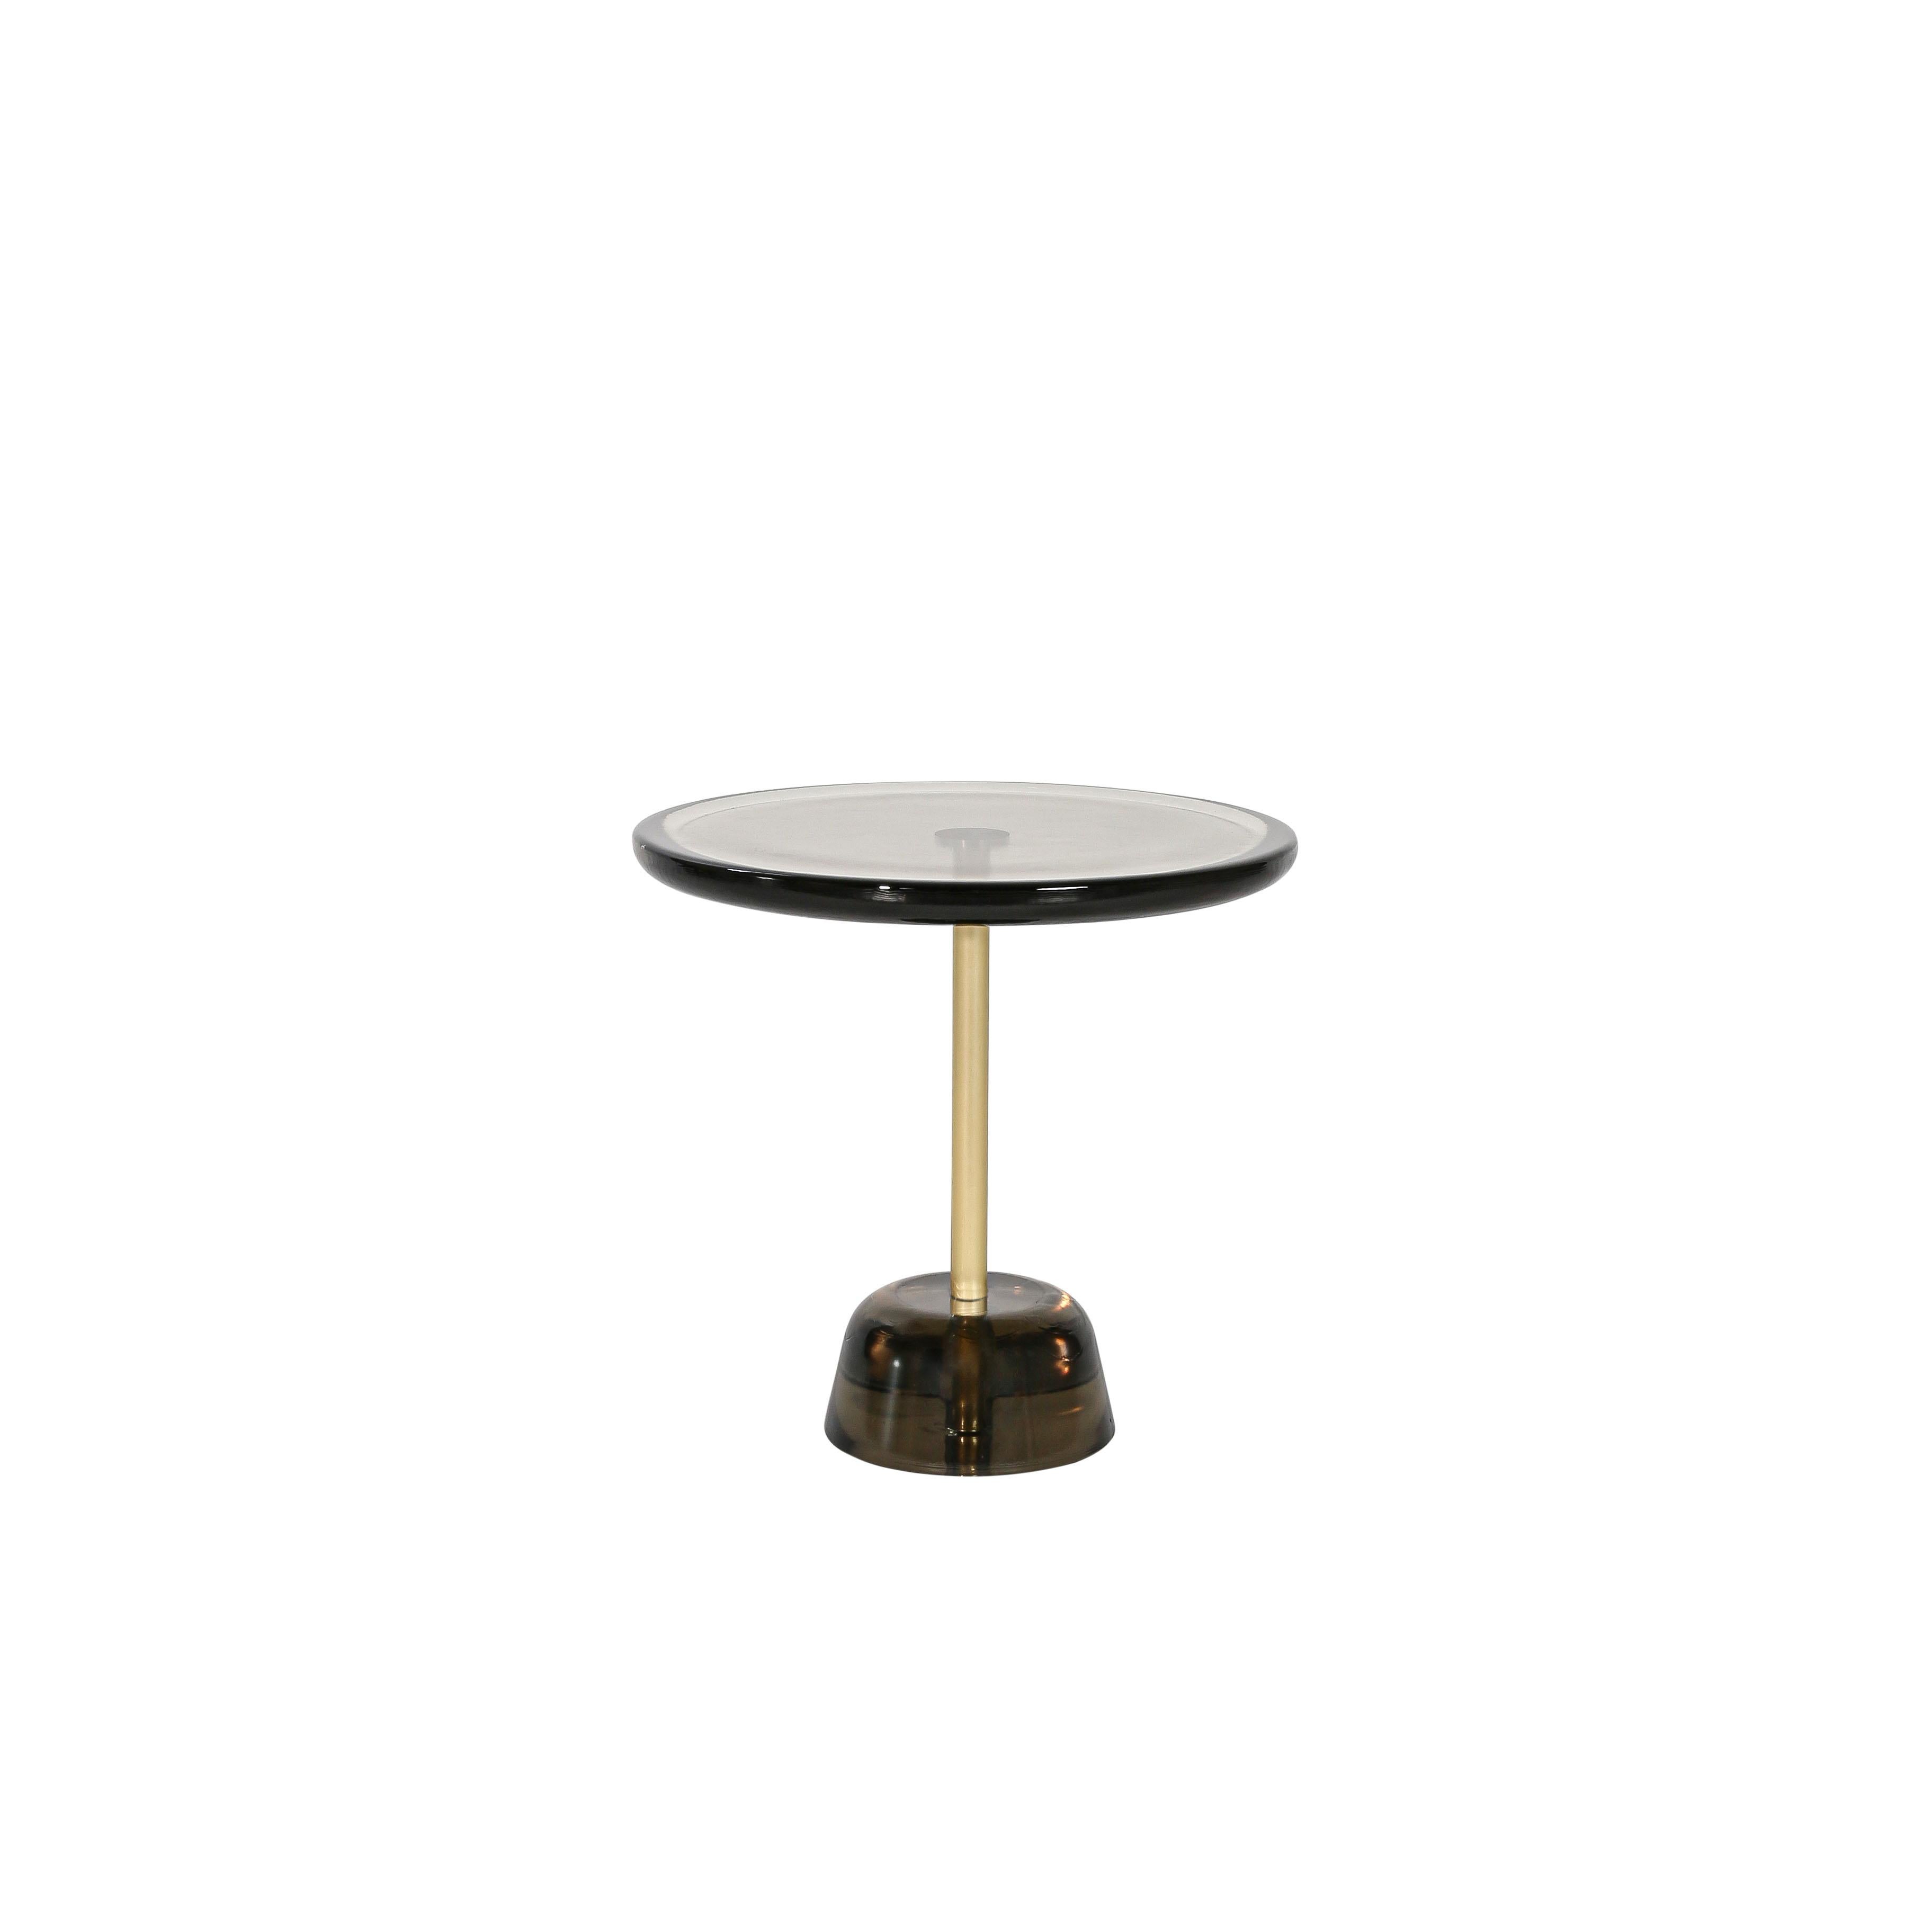 Pina low light grey brass side table by Pulpo
Dimensions: D 44 x H 42 cm
Materials: glass; brass and steel

Also available in different colours.

Sebastian Herkner’s distinctively tall, skinny side table series pina is inspired by the abstract